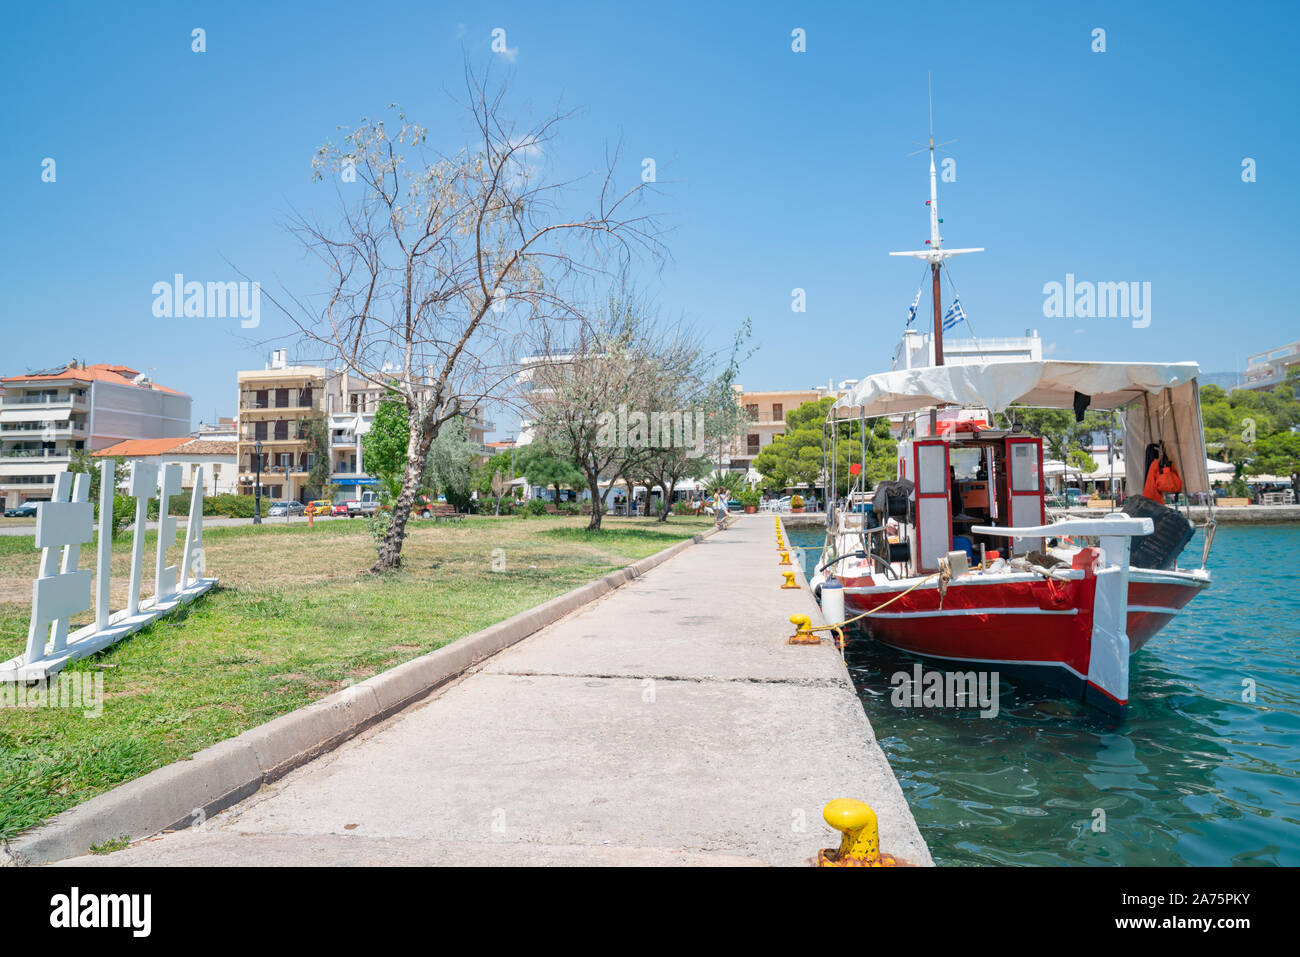 Waterfront with hashtad Itea on grass beside promenade with boat moored tied to yellow bollards. Stock Photo